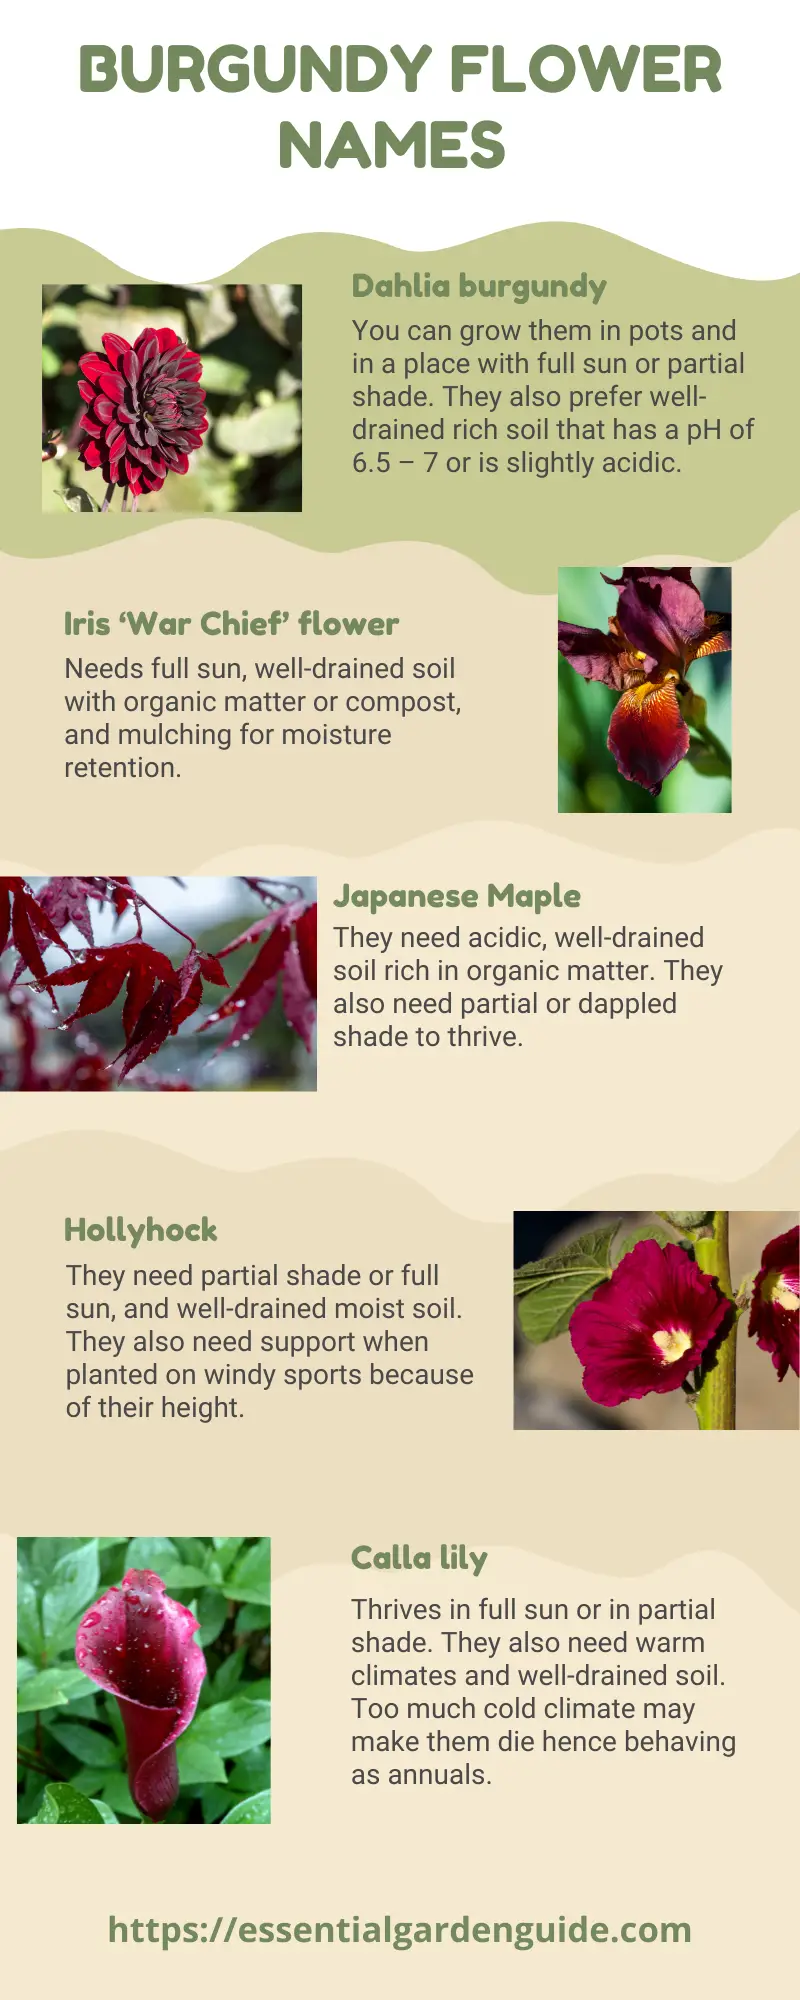 Names and pictures of 5 common burgundy flowers